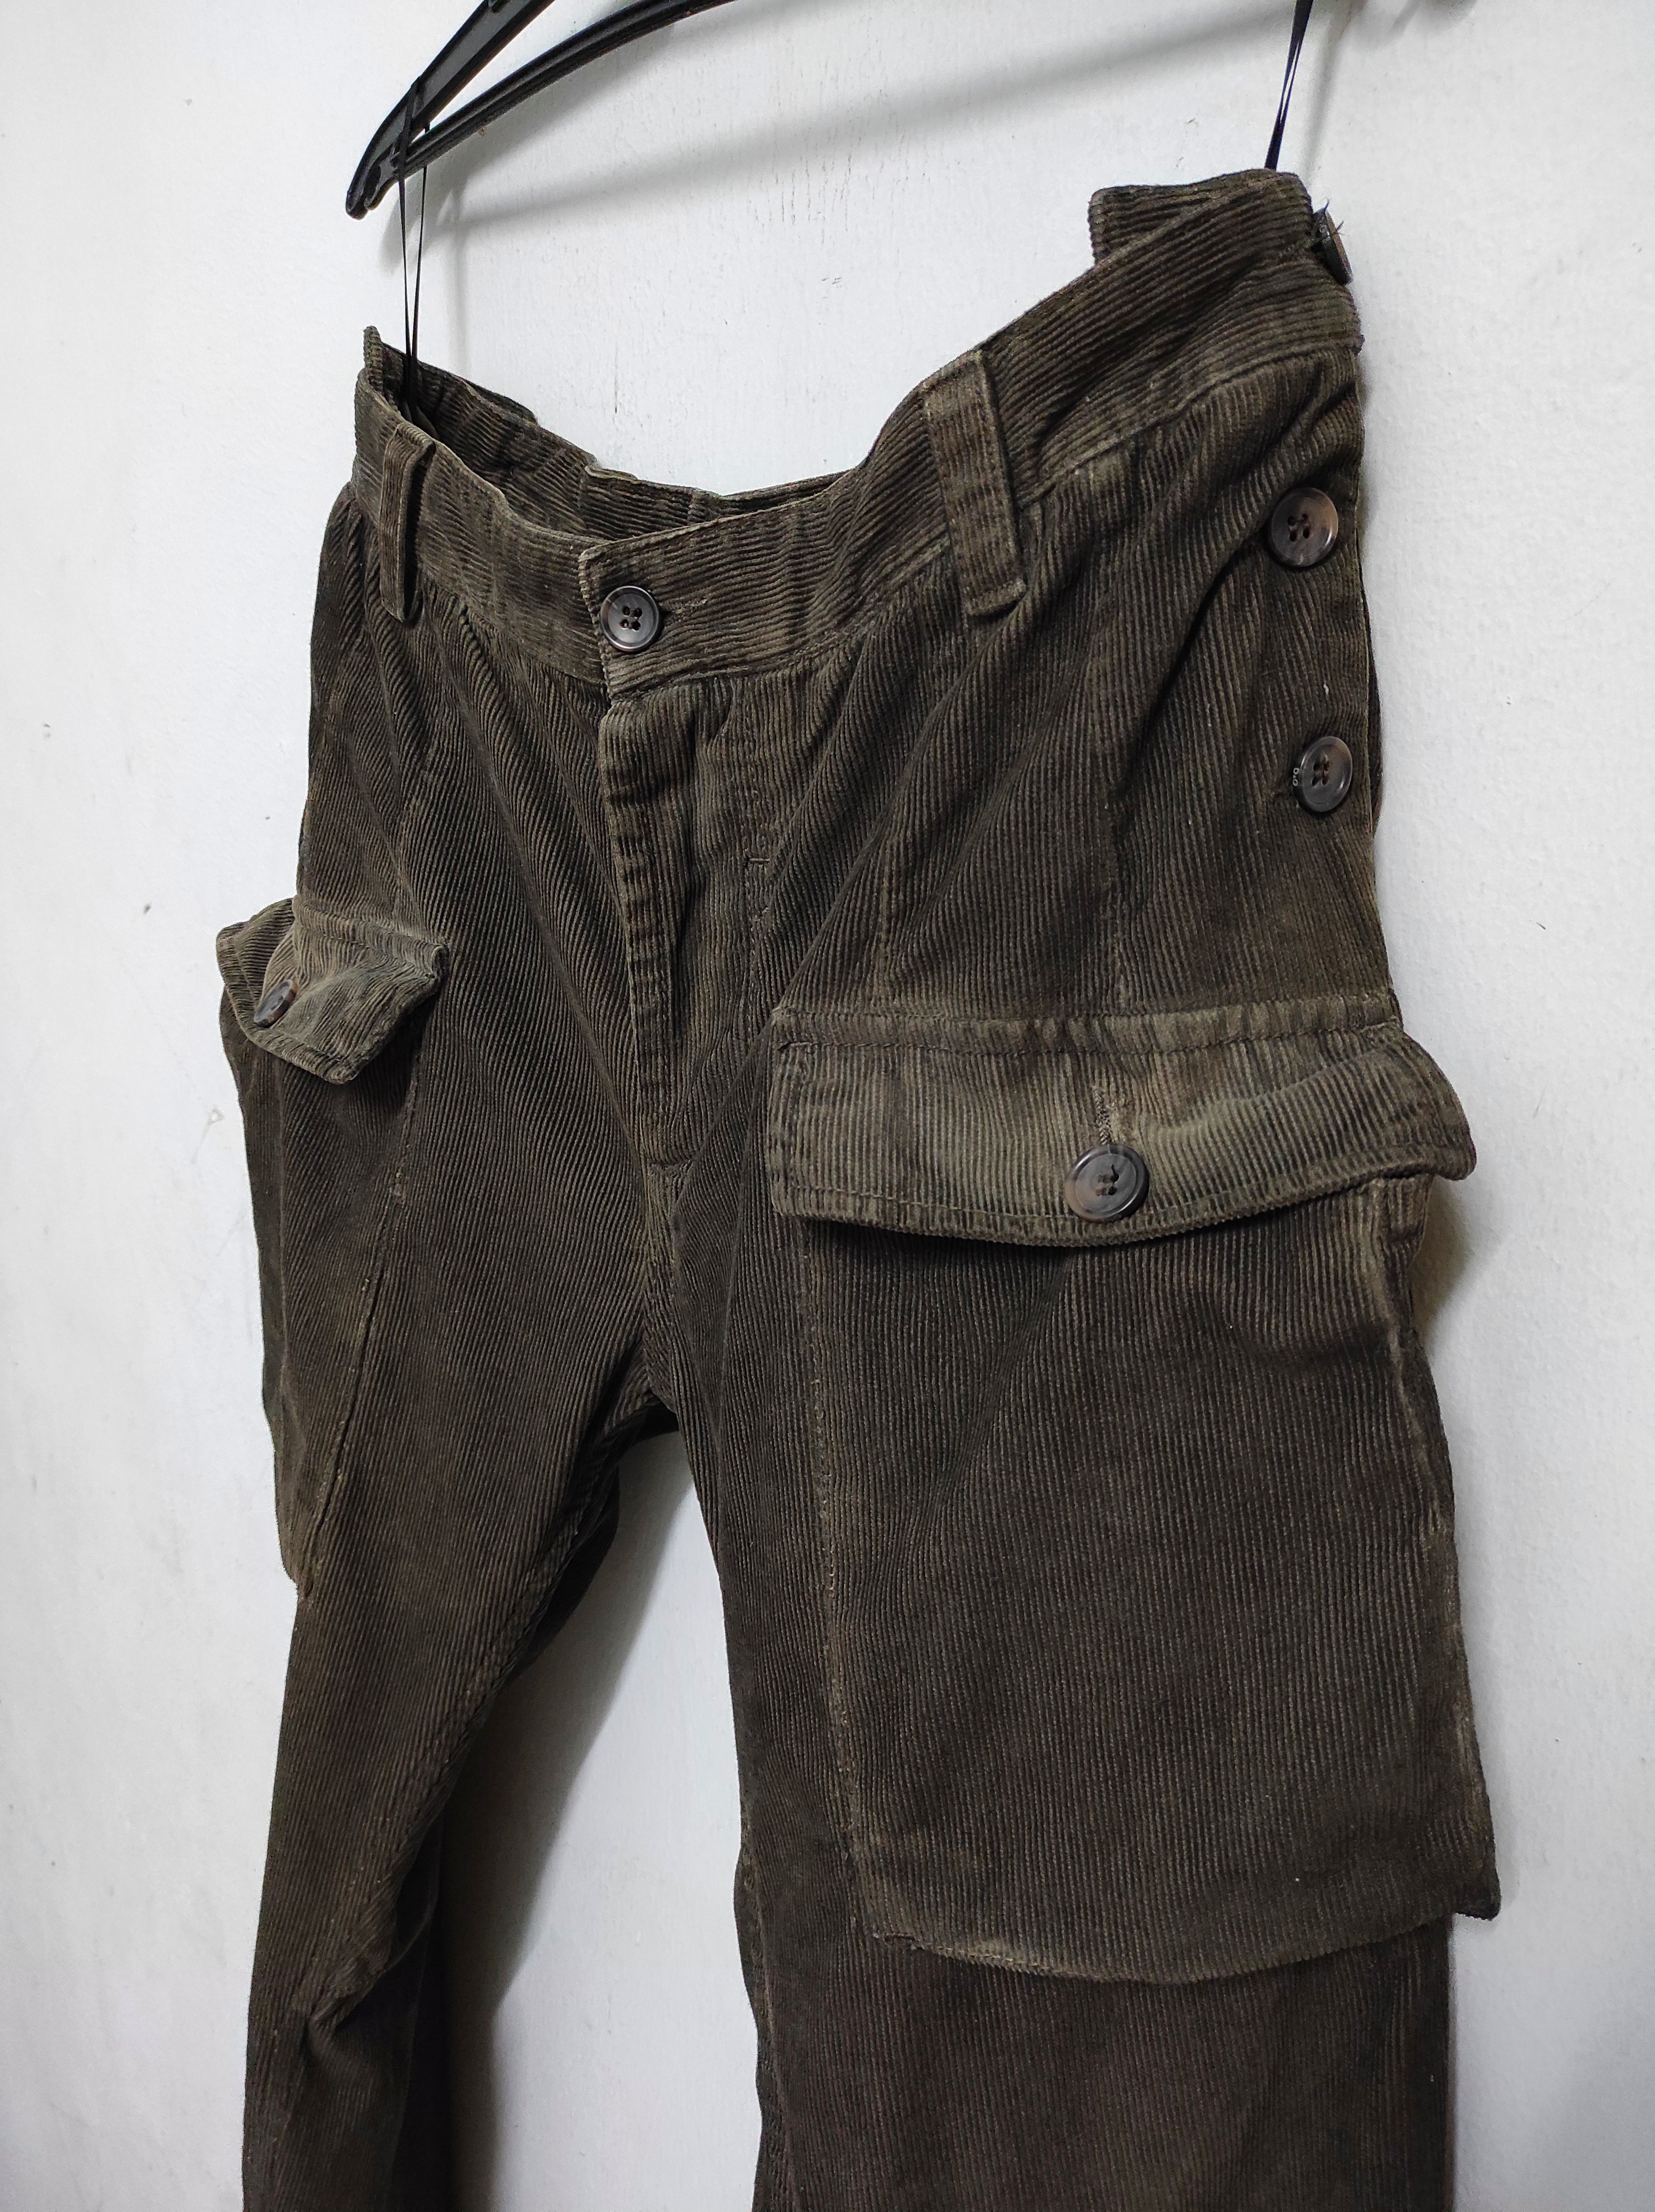 AW2003 Dolce and Gabbana pocket cargo military pants - 9